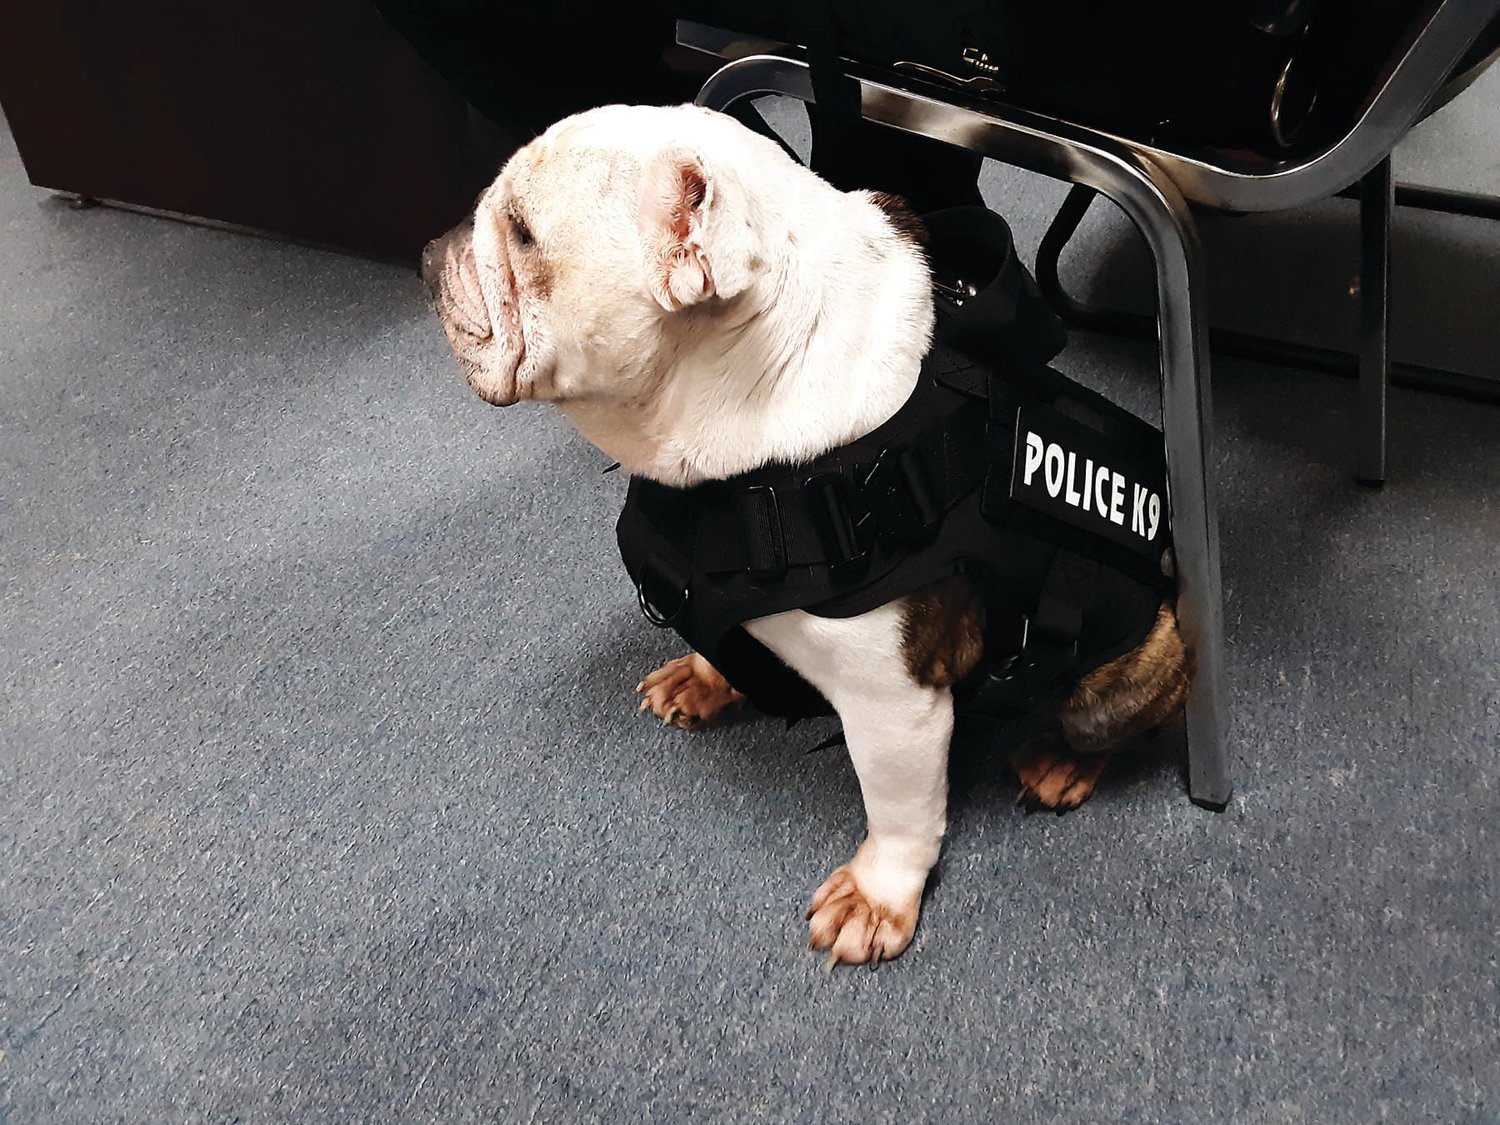 Meet Gertie, the newest member of the Springfield Township Police Department. The diminutive bulldog made her presence felt, taking the spot reserved for the township solicitor  and snorting loudly several times during the meeting. Photograph by Barrie-John Murphy